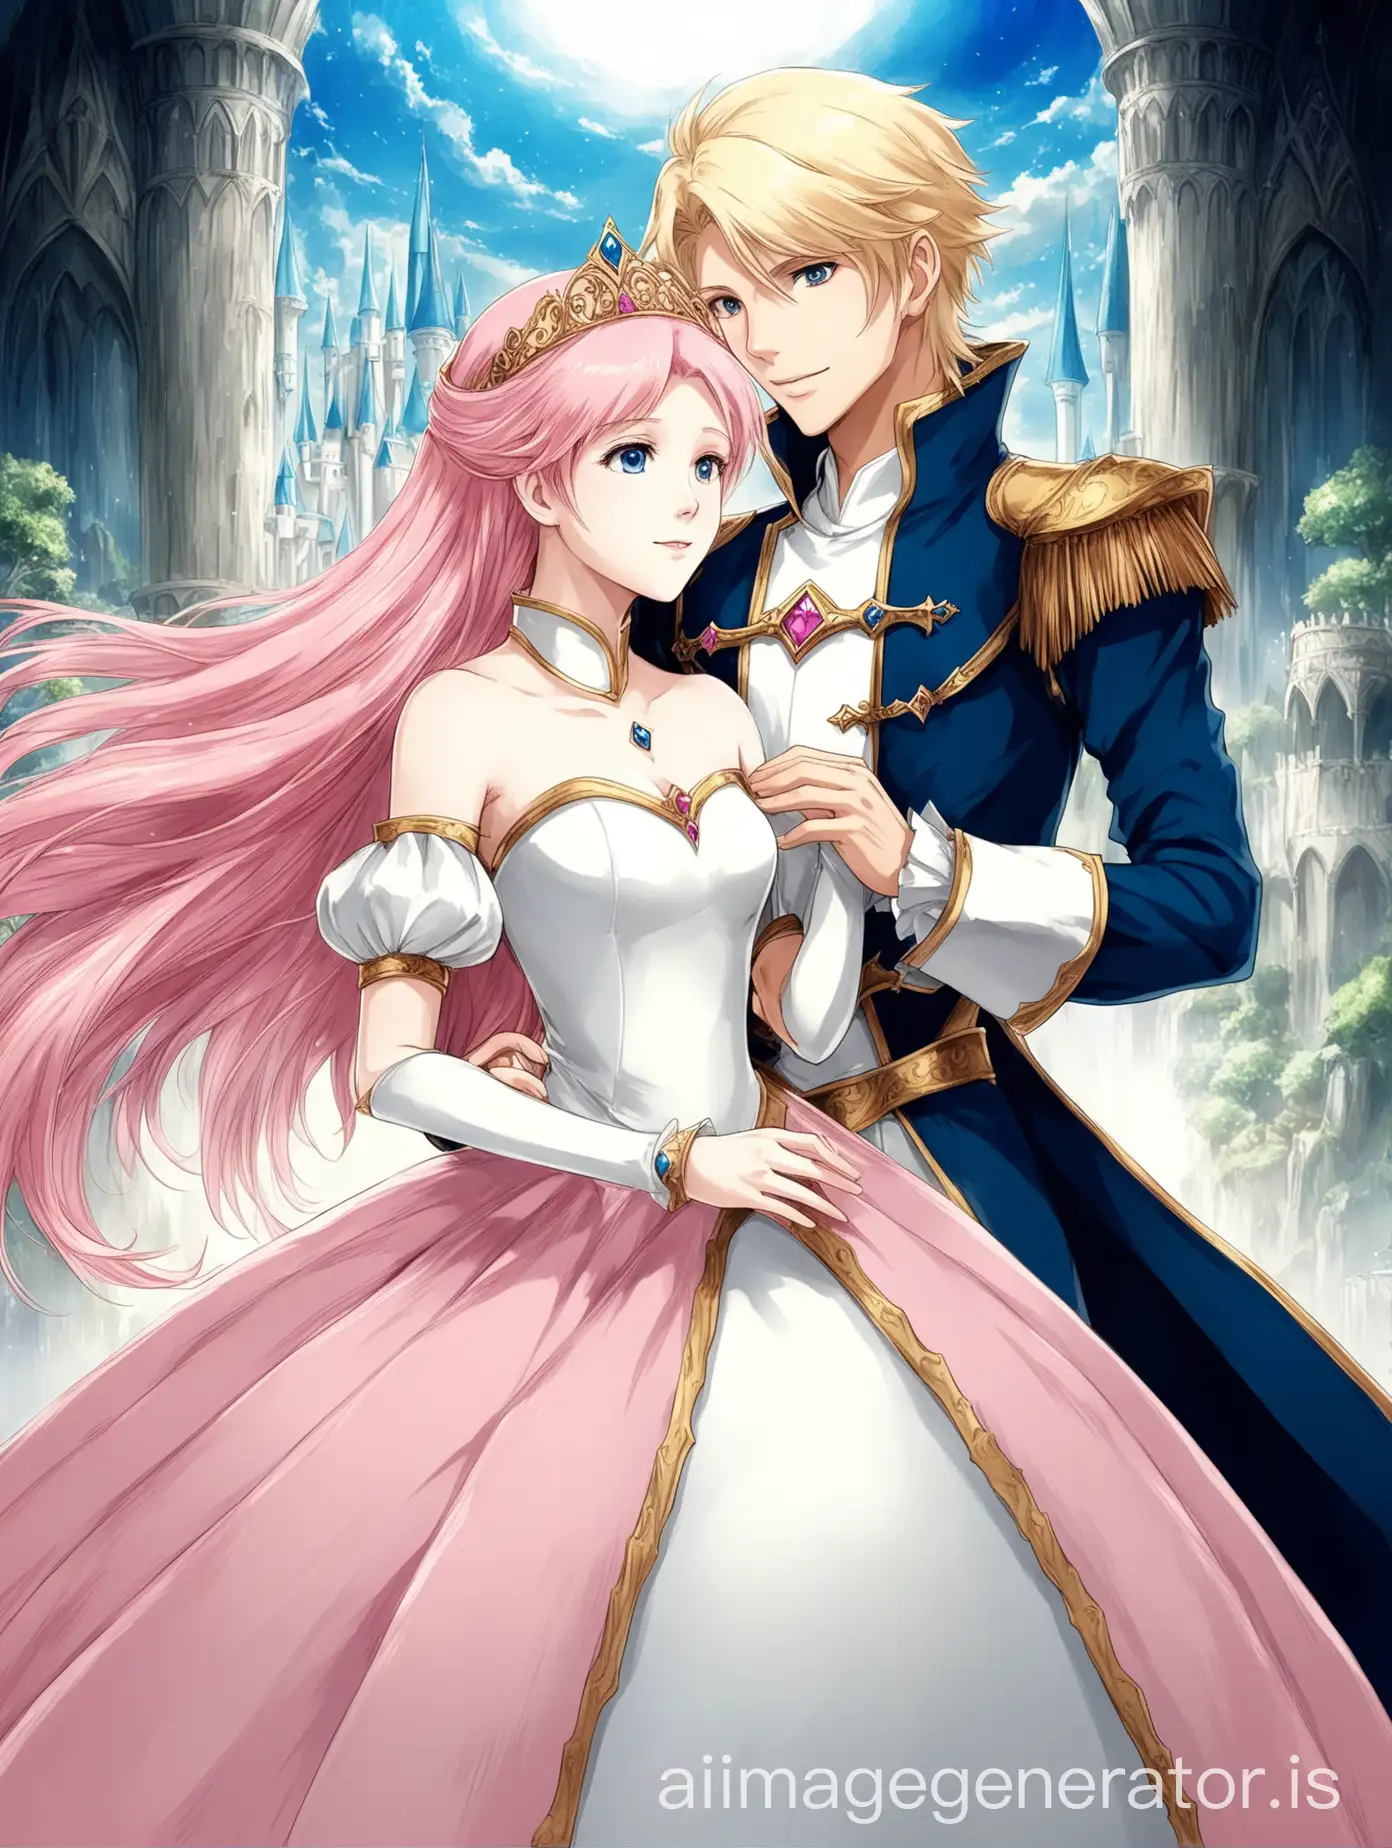 a fantasy world anime picture where the princess has pink hair and the prince has blond hair . both have fair skin .  